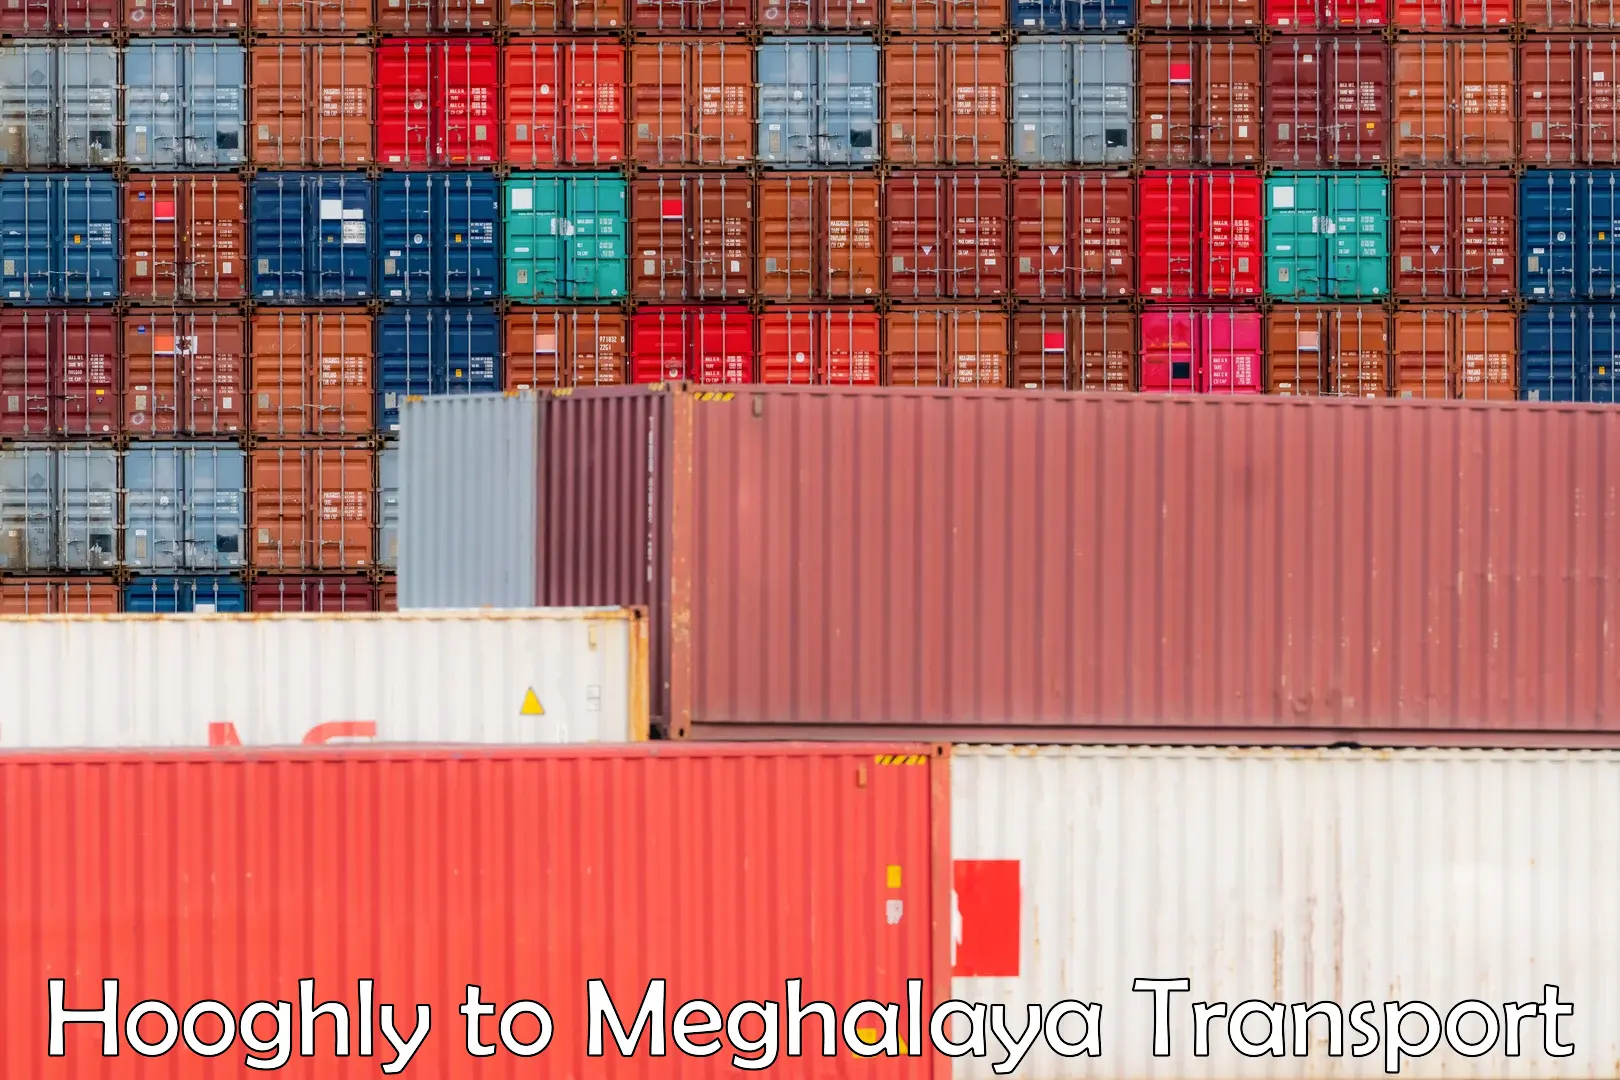 Container transport service Hooghly to Meghalaya